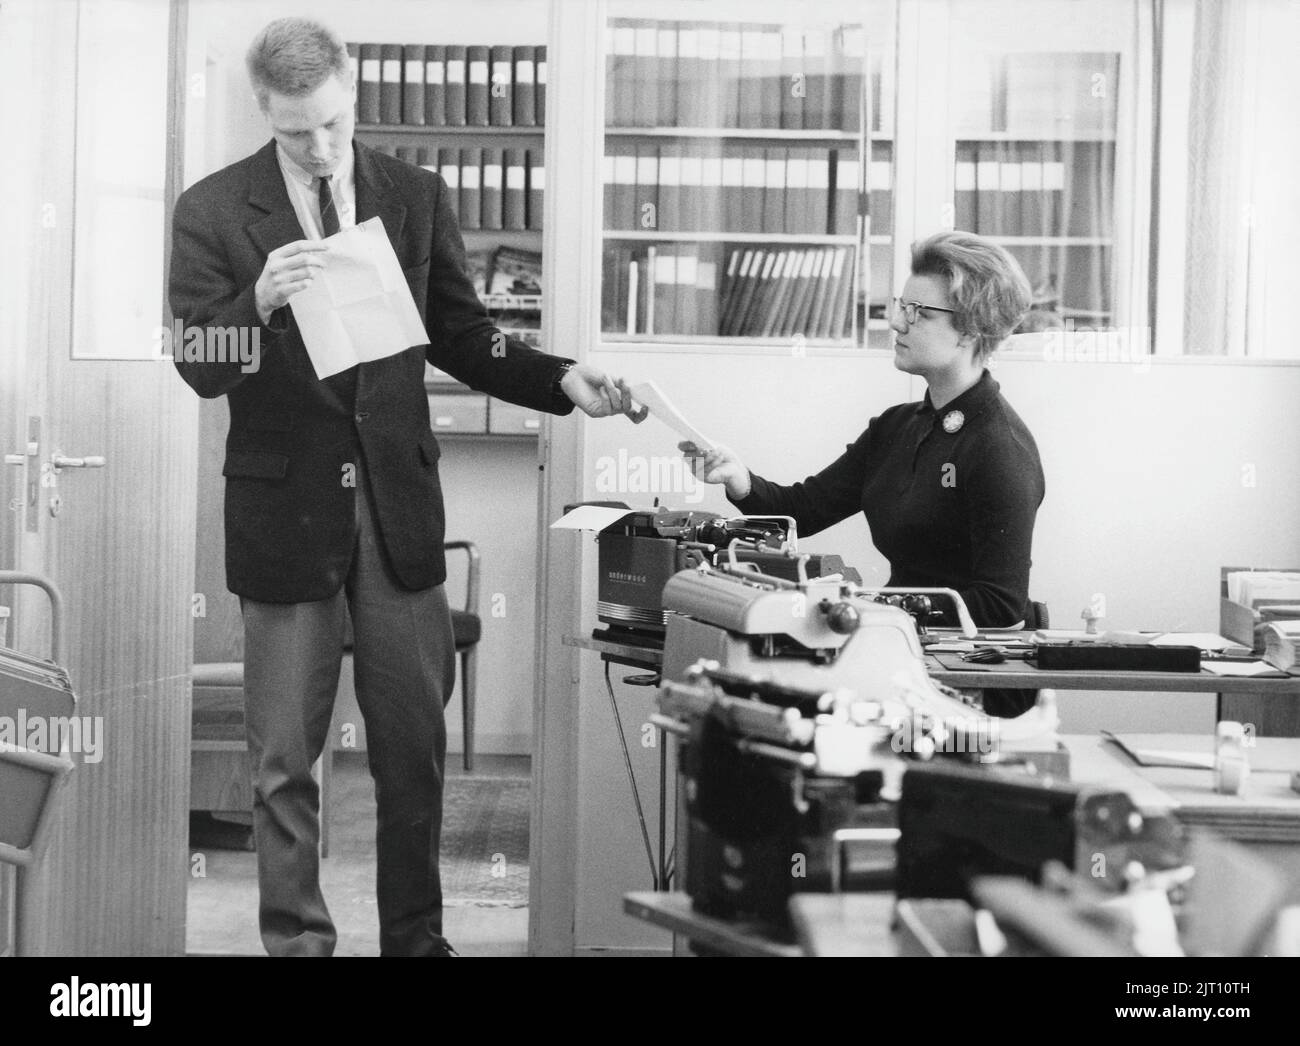 Office girl in the 1960s. A woman is sitting by her typewriter and a man is standing in the room both reading and being handed a document from her at the same time. A good illustration of how the relations were at the time between employees and managers as he gives her not attention or gratitude for her work, visibly a man who consider himself being on a higher level in the company than her. Sweden 1960. Stock Photo